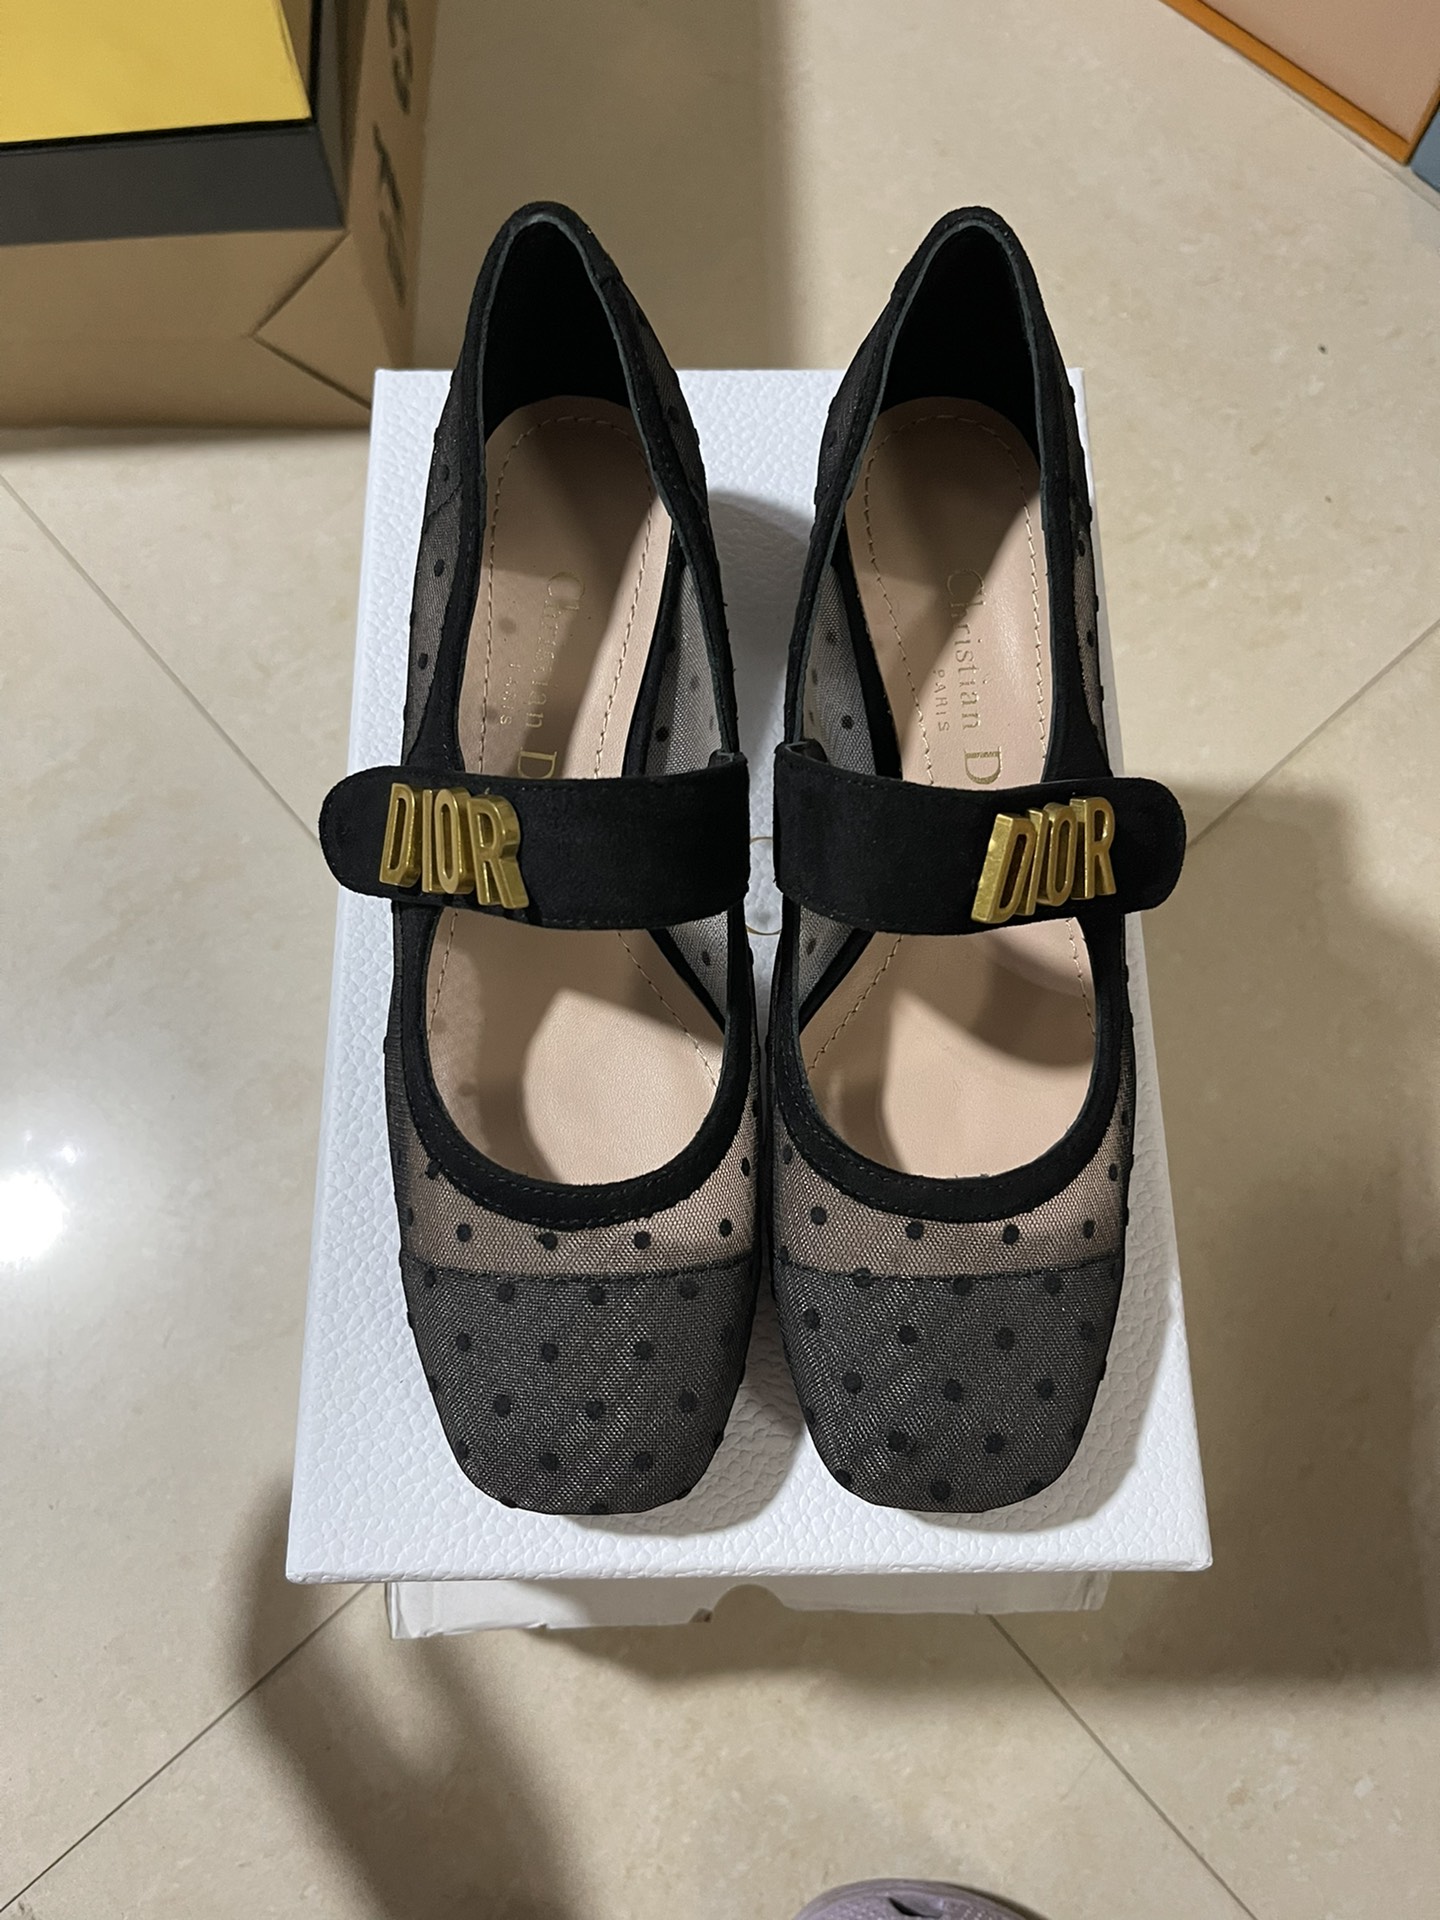 Dior Single Layer Shoes Fake Cheap best online